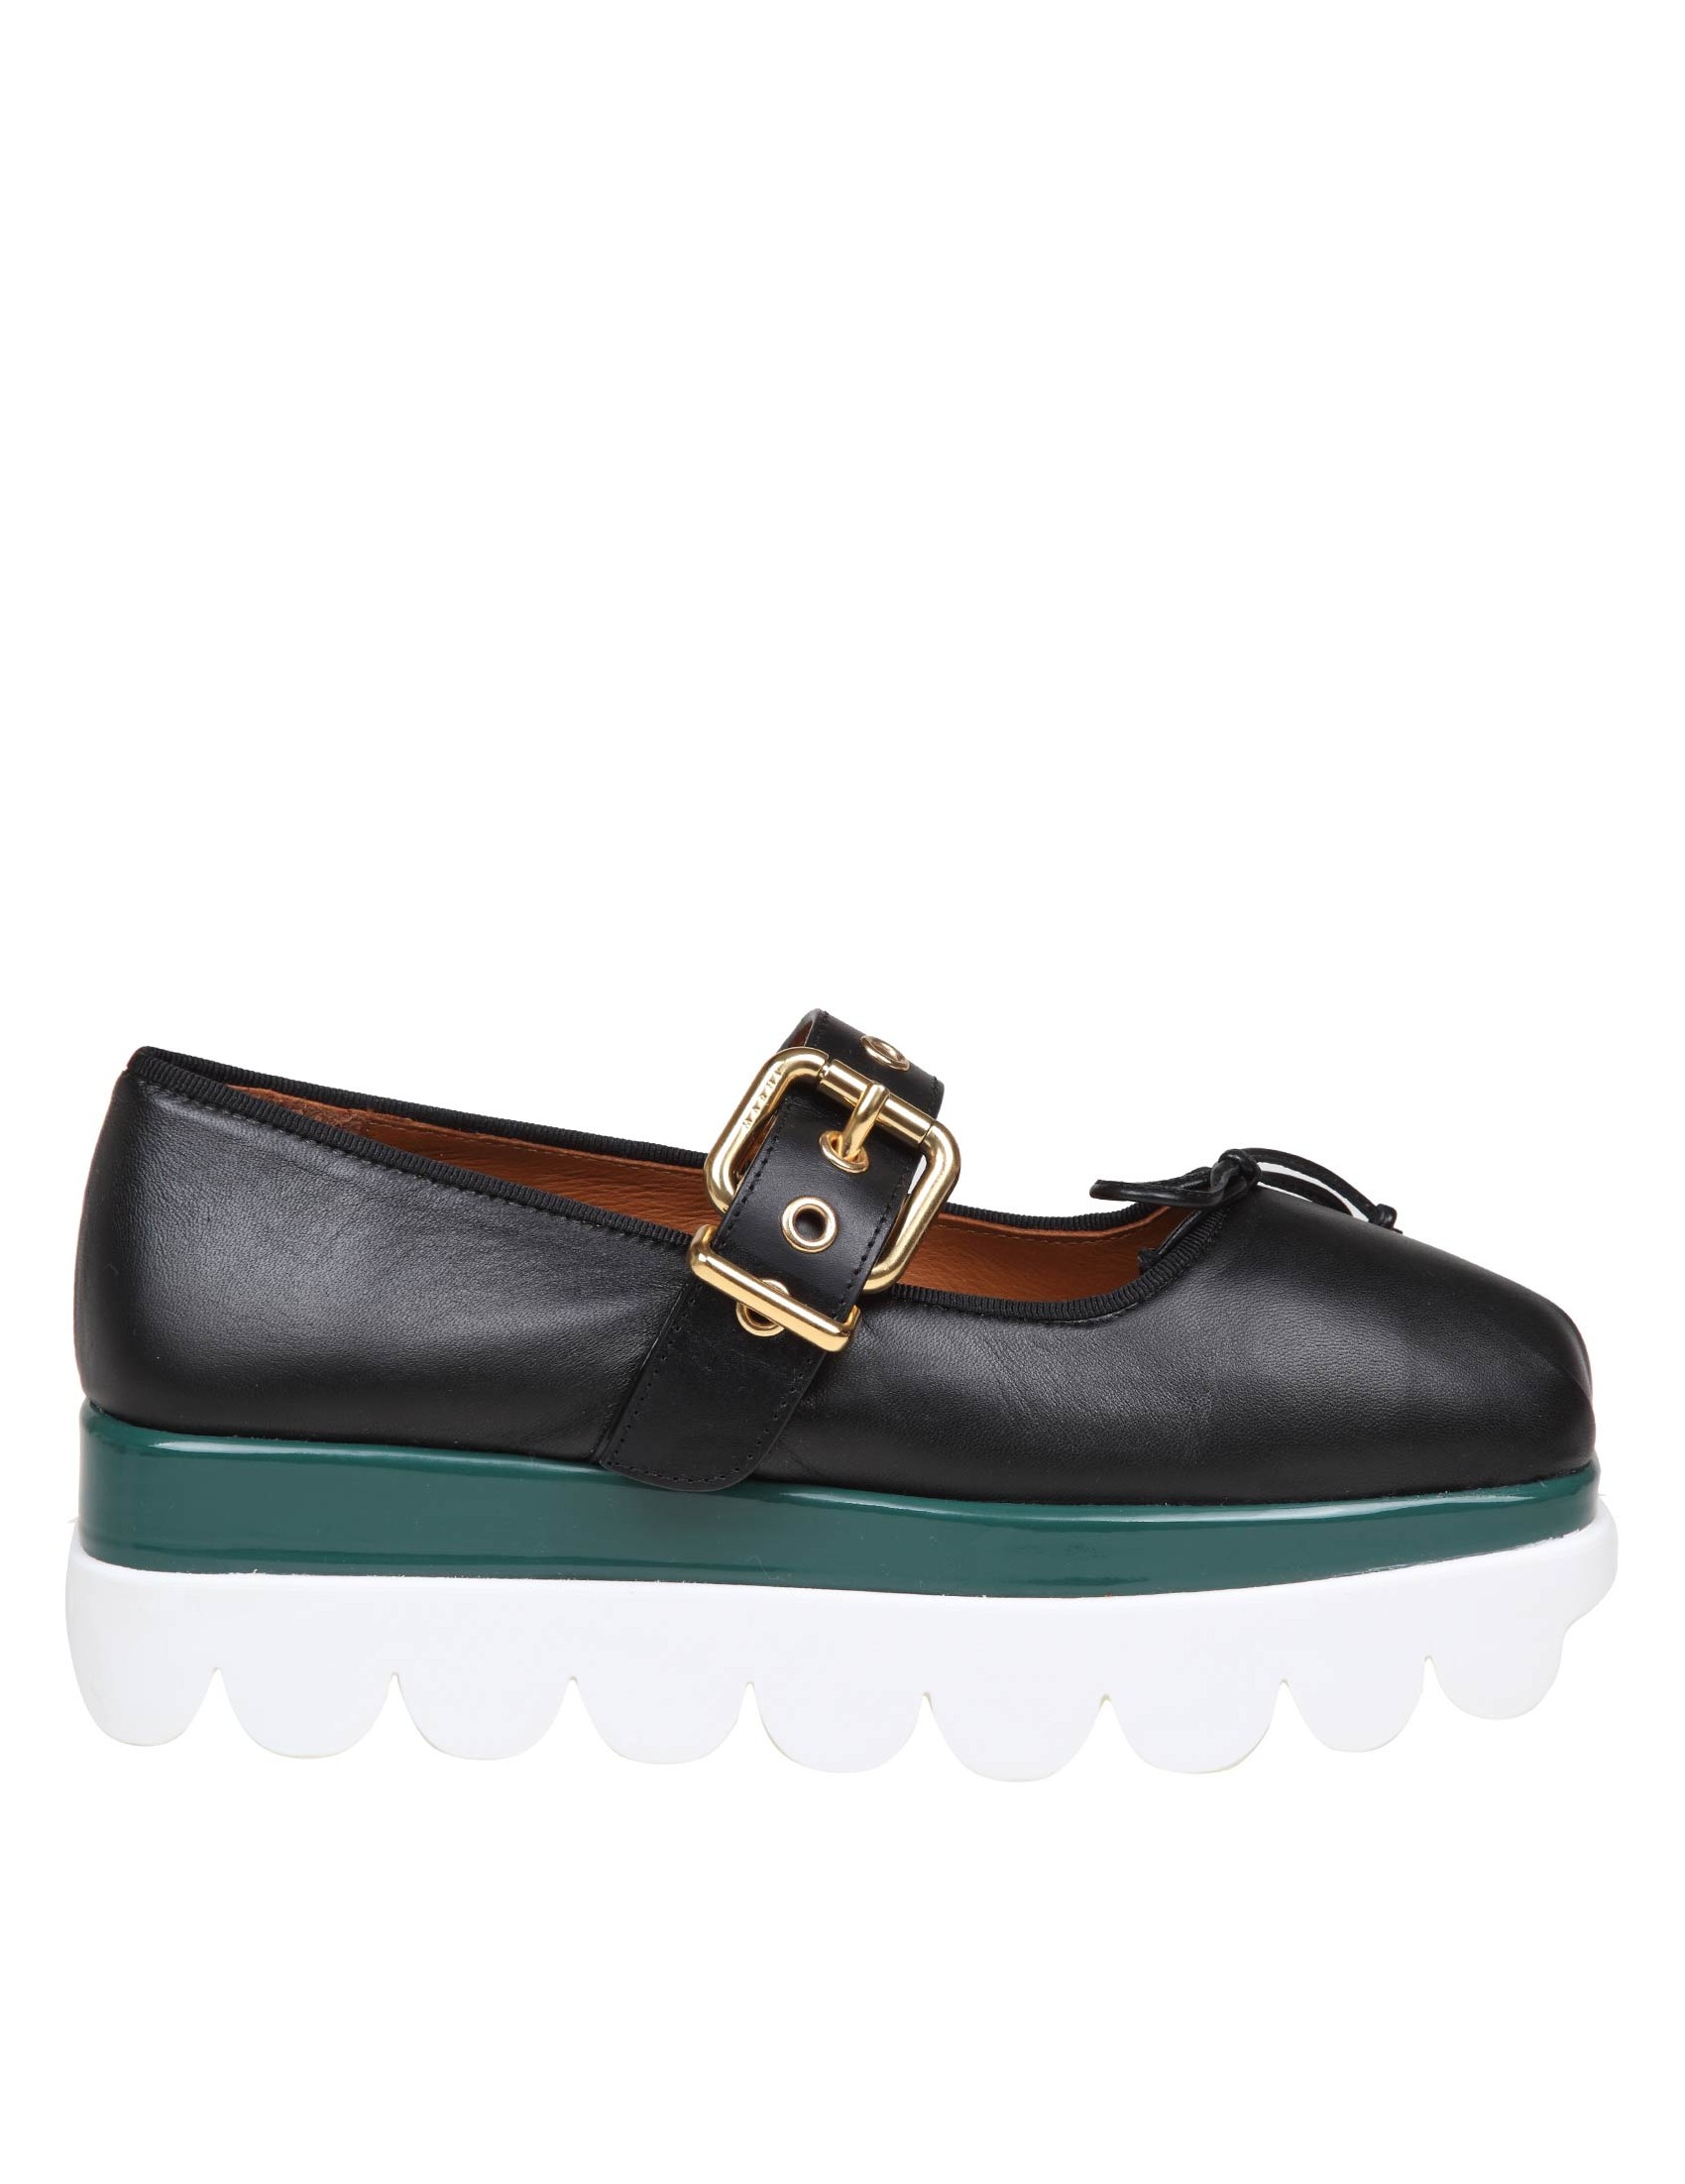 MARNI MARY JANE SHOES IN BLACK LEATHER